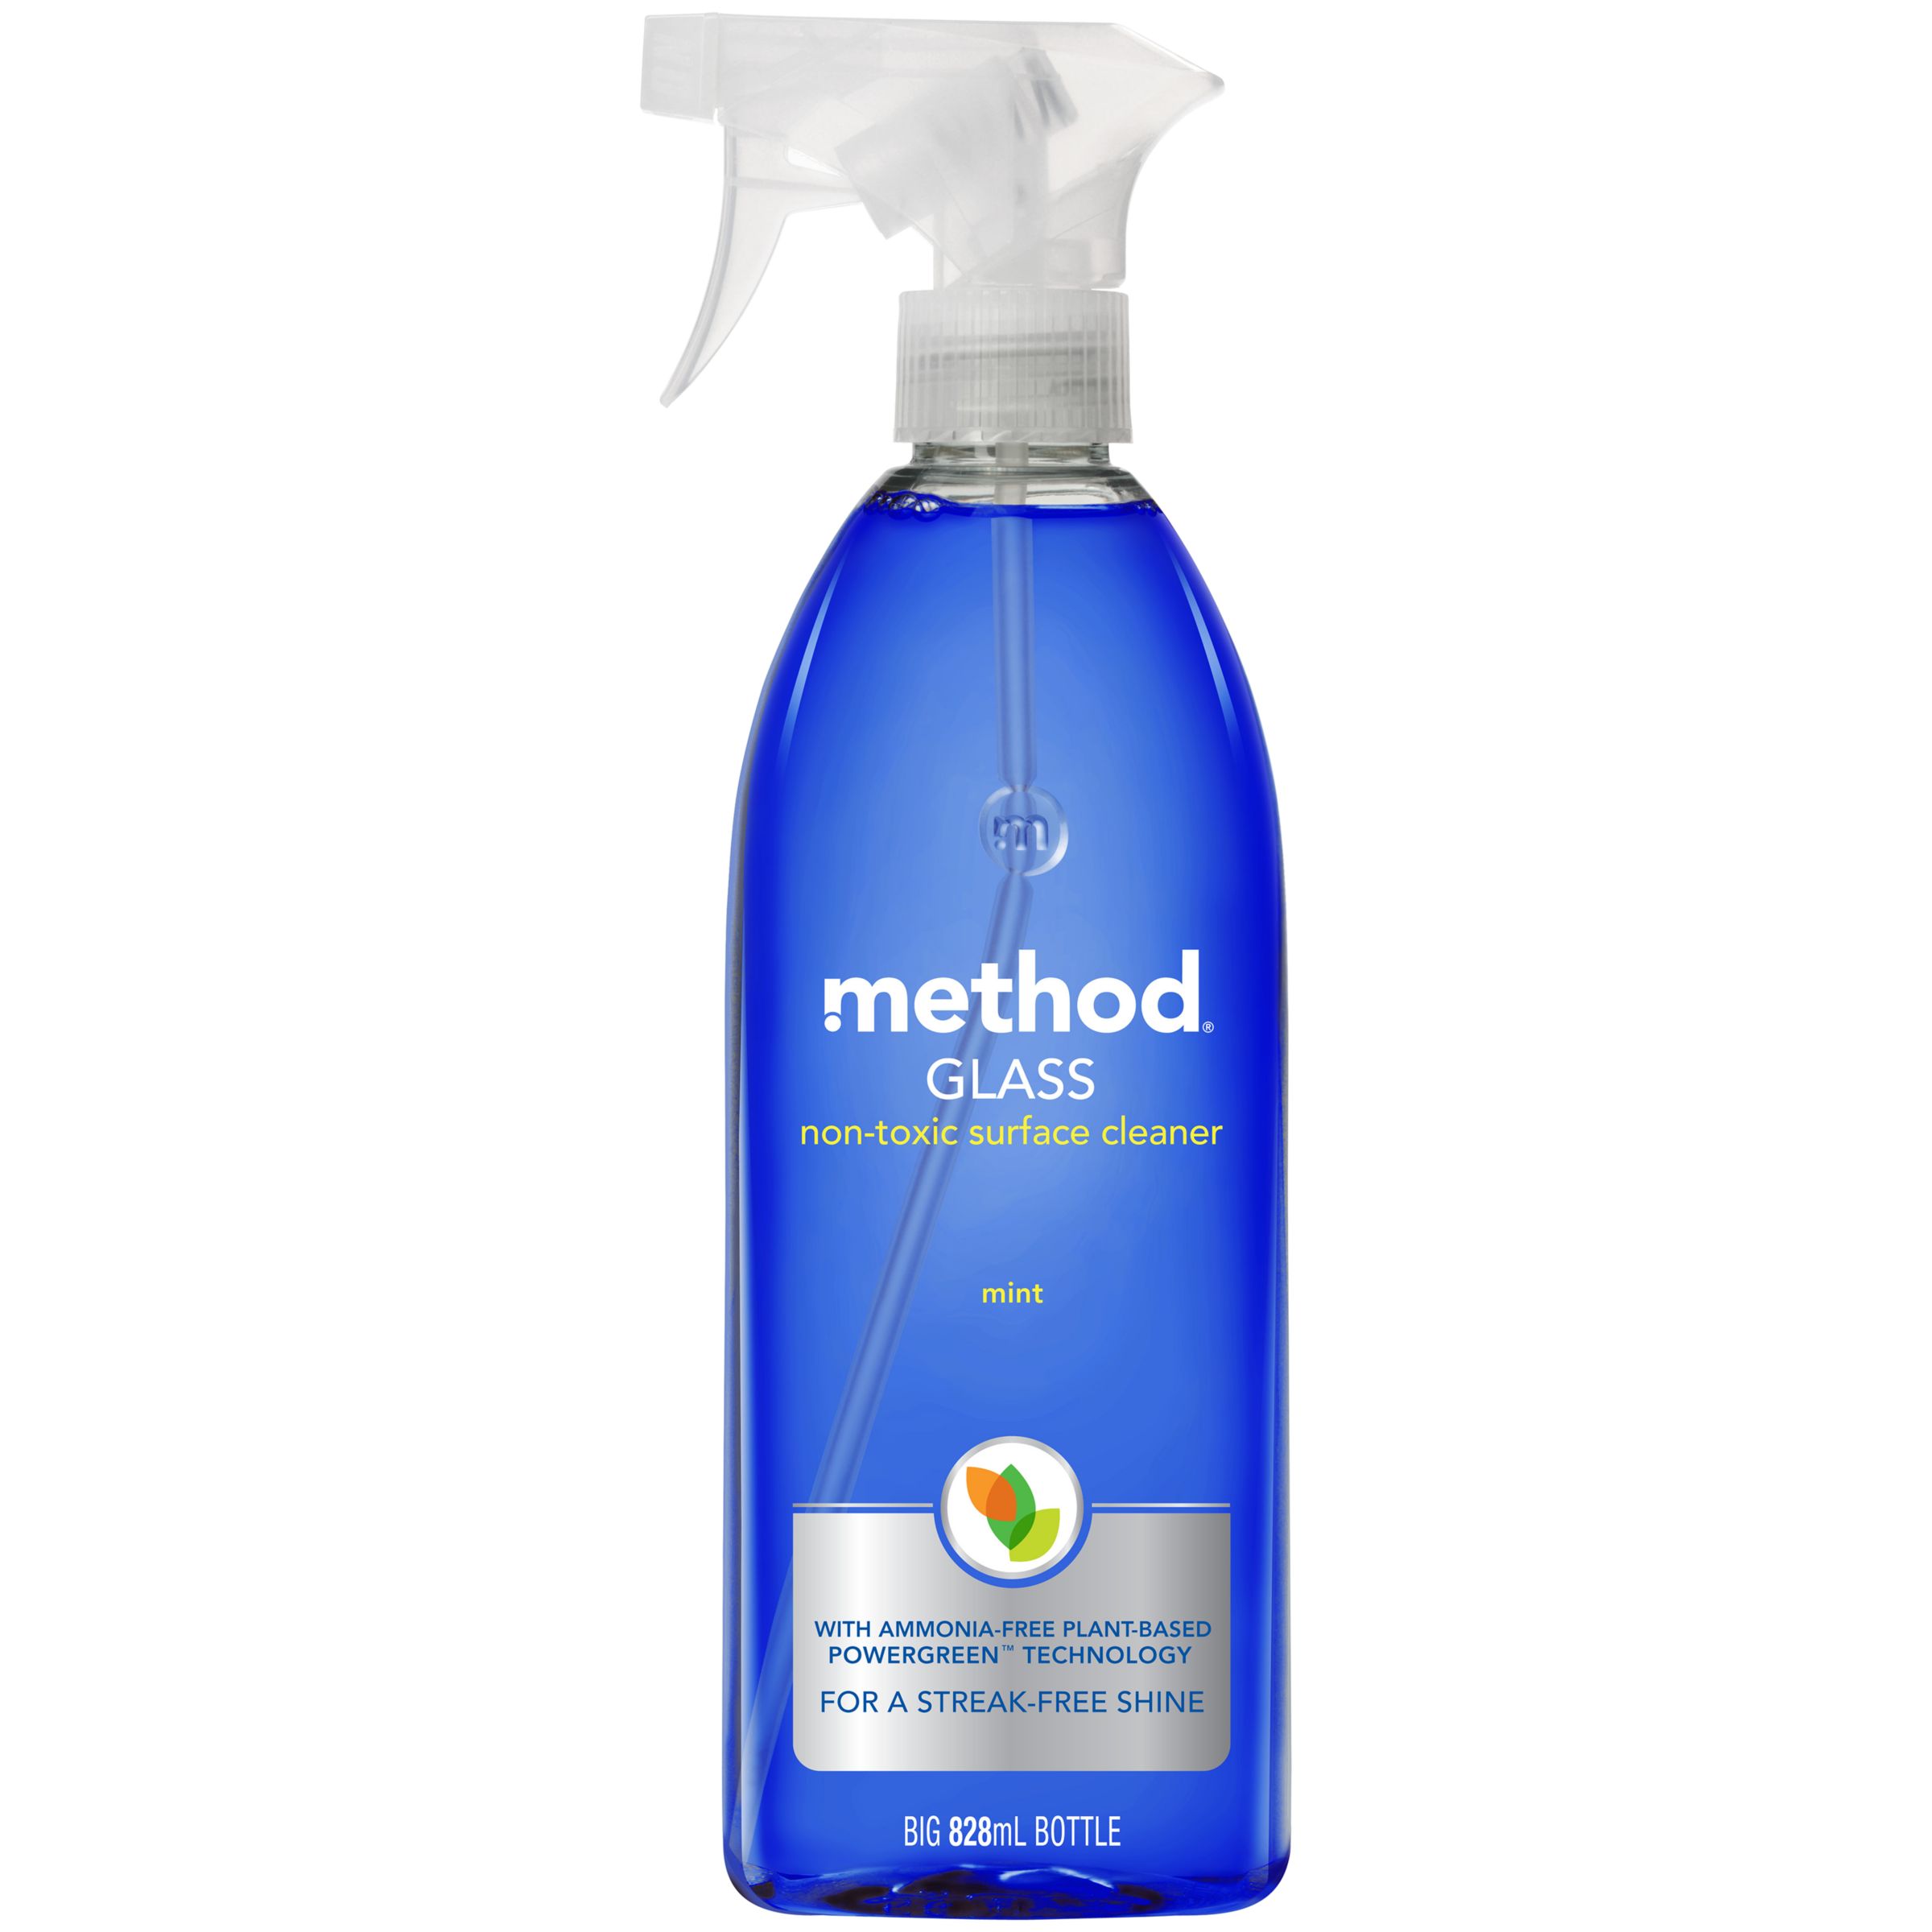 window cleaning products